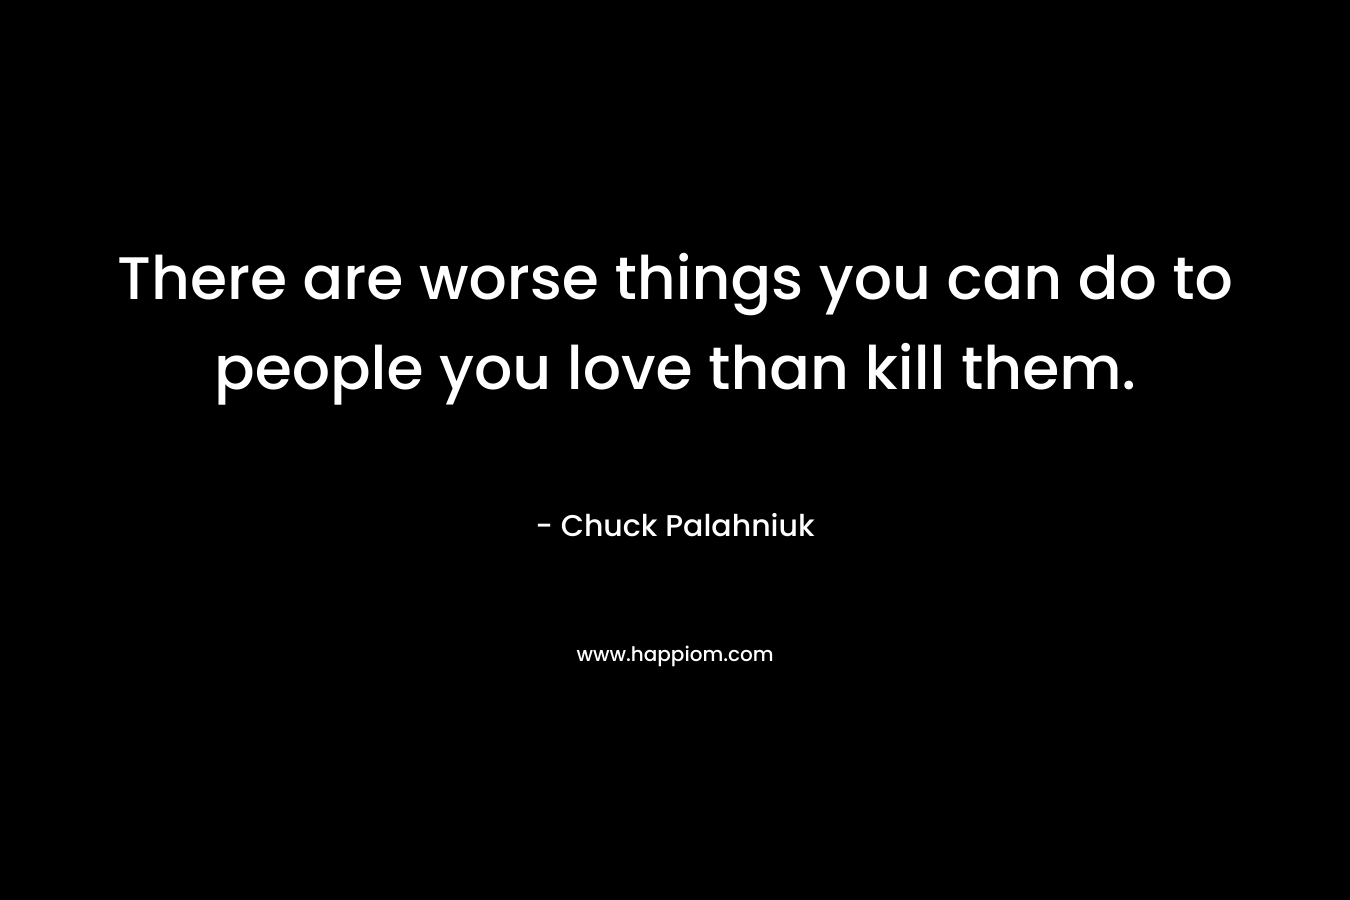 There are worse things you can do to people you love than kill them.